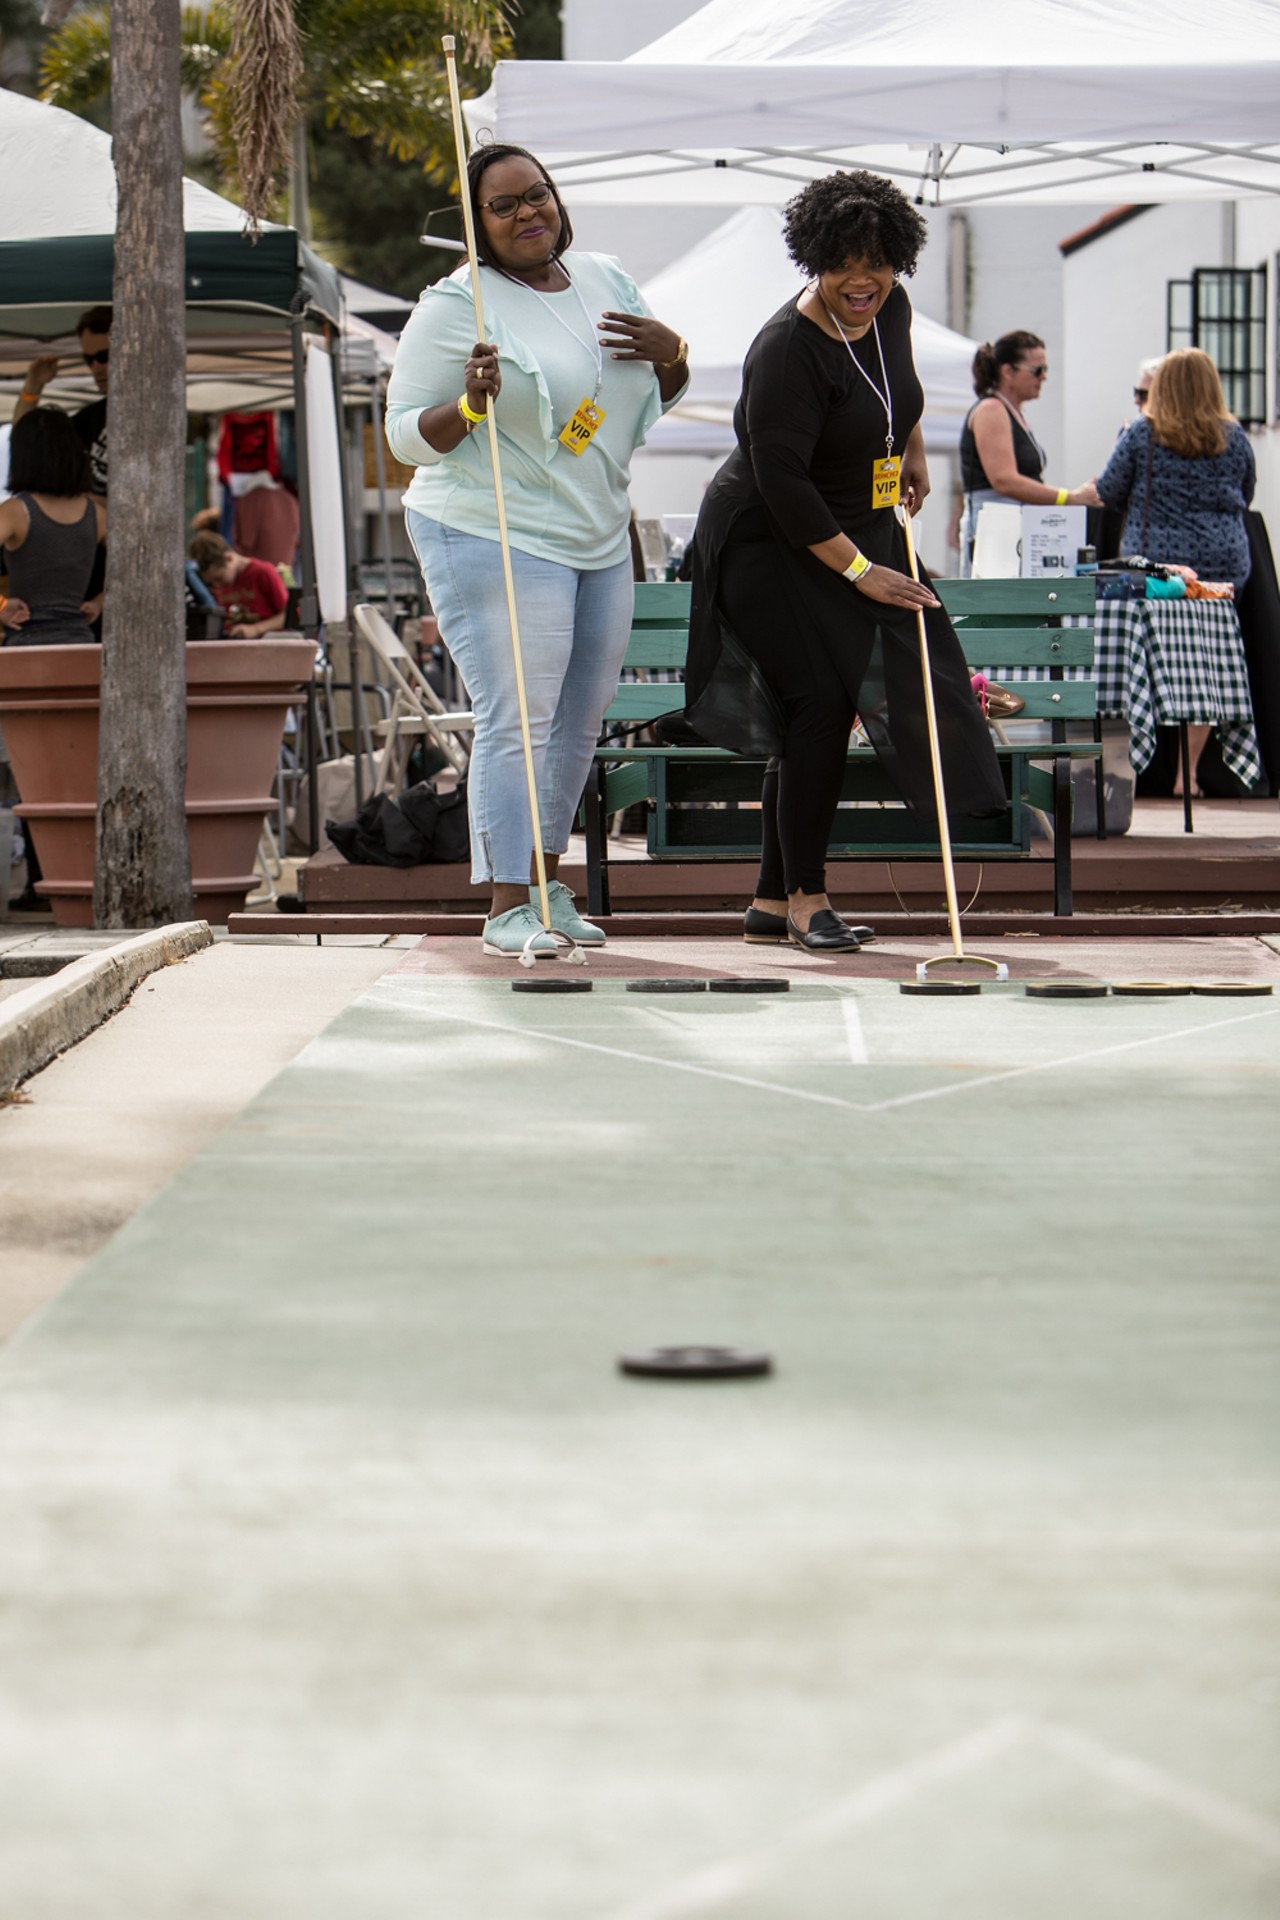 Here are all the photos from Brunched 2018 at St. Pete Shuffleboard Club